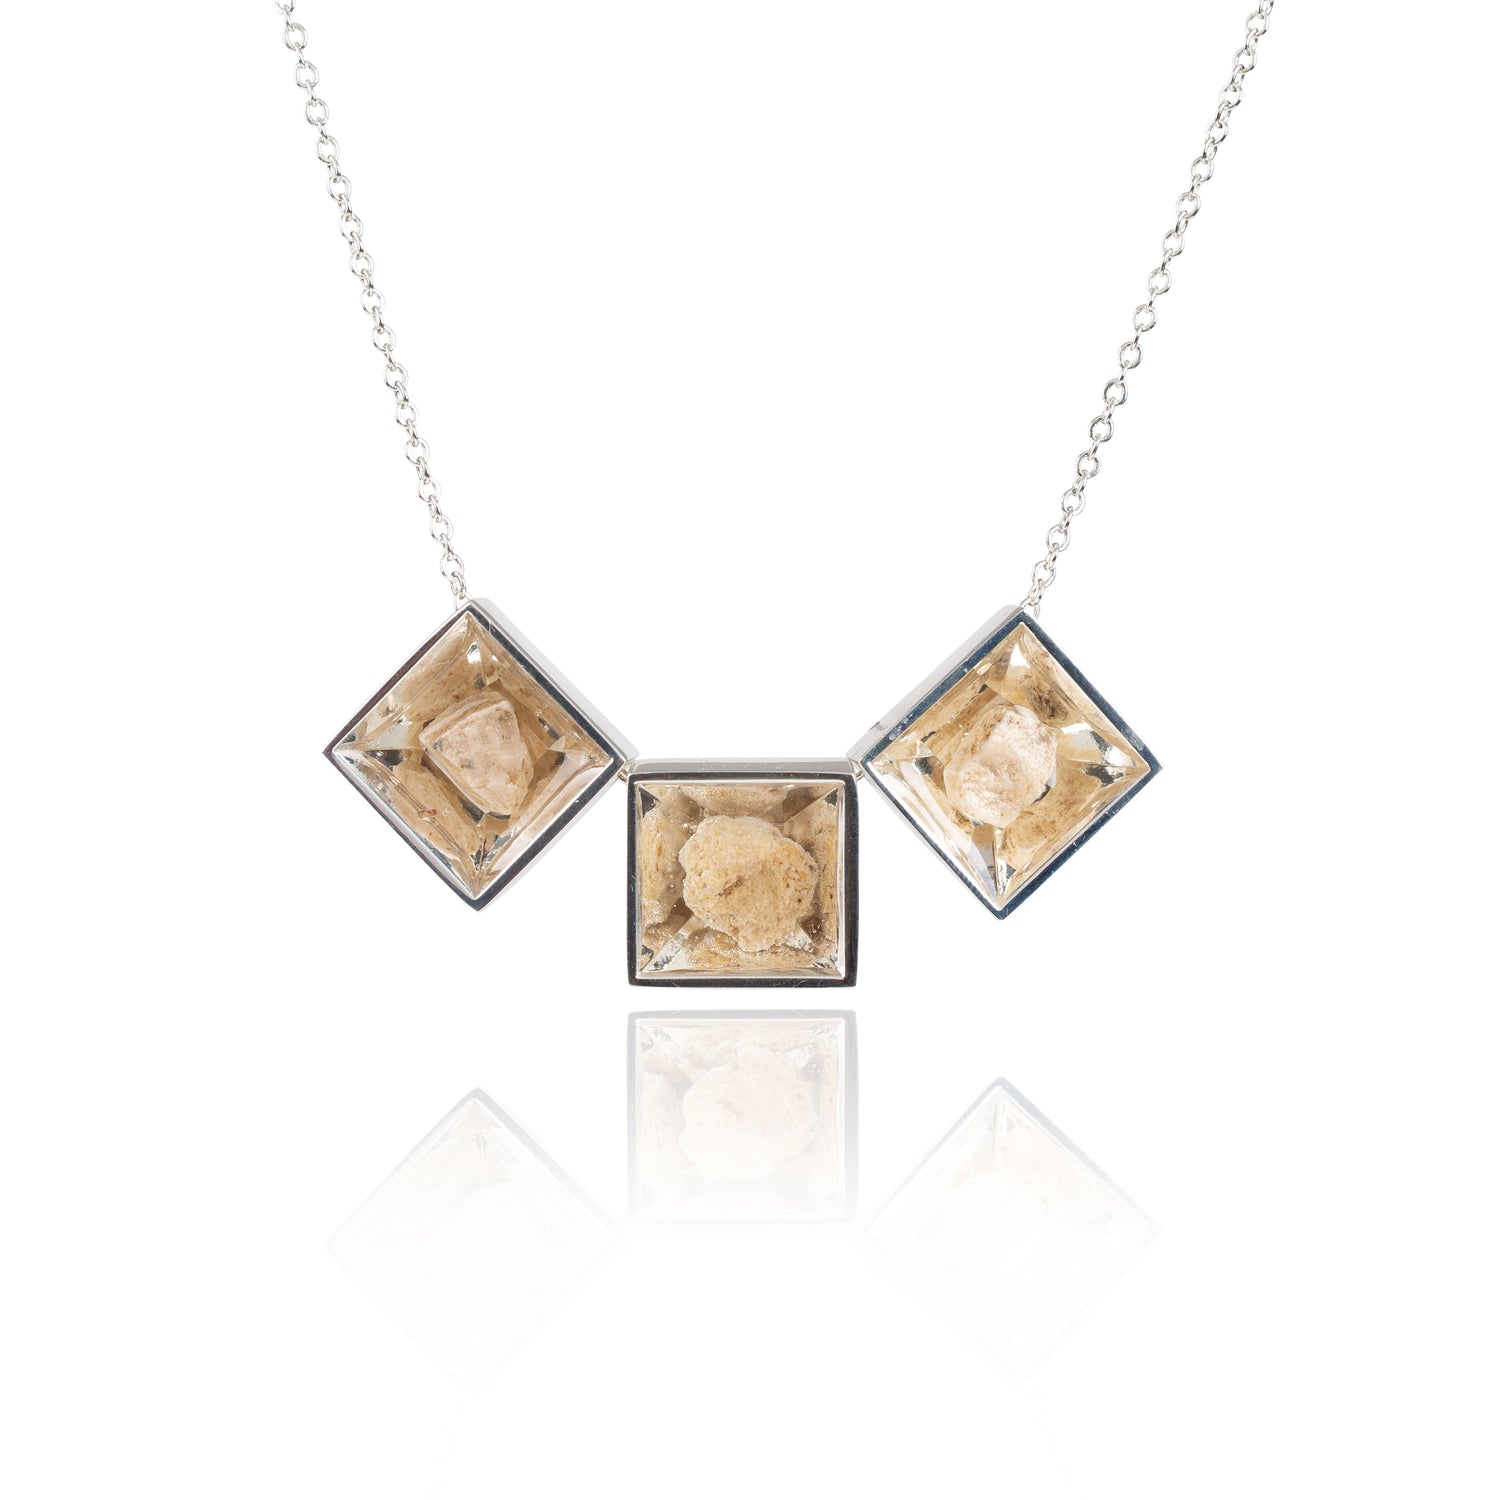 Three small natural tan stones sit in the middle of three separate square shaped metal pendants in a silver color. The pendants are hanging on a silver chain.